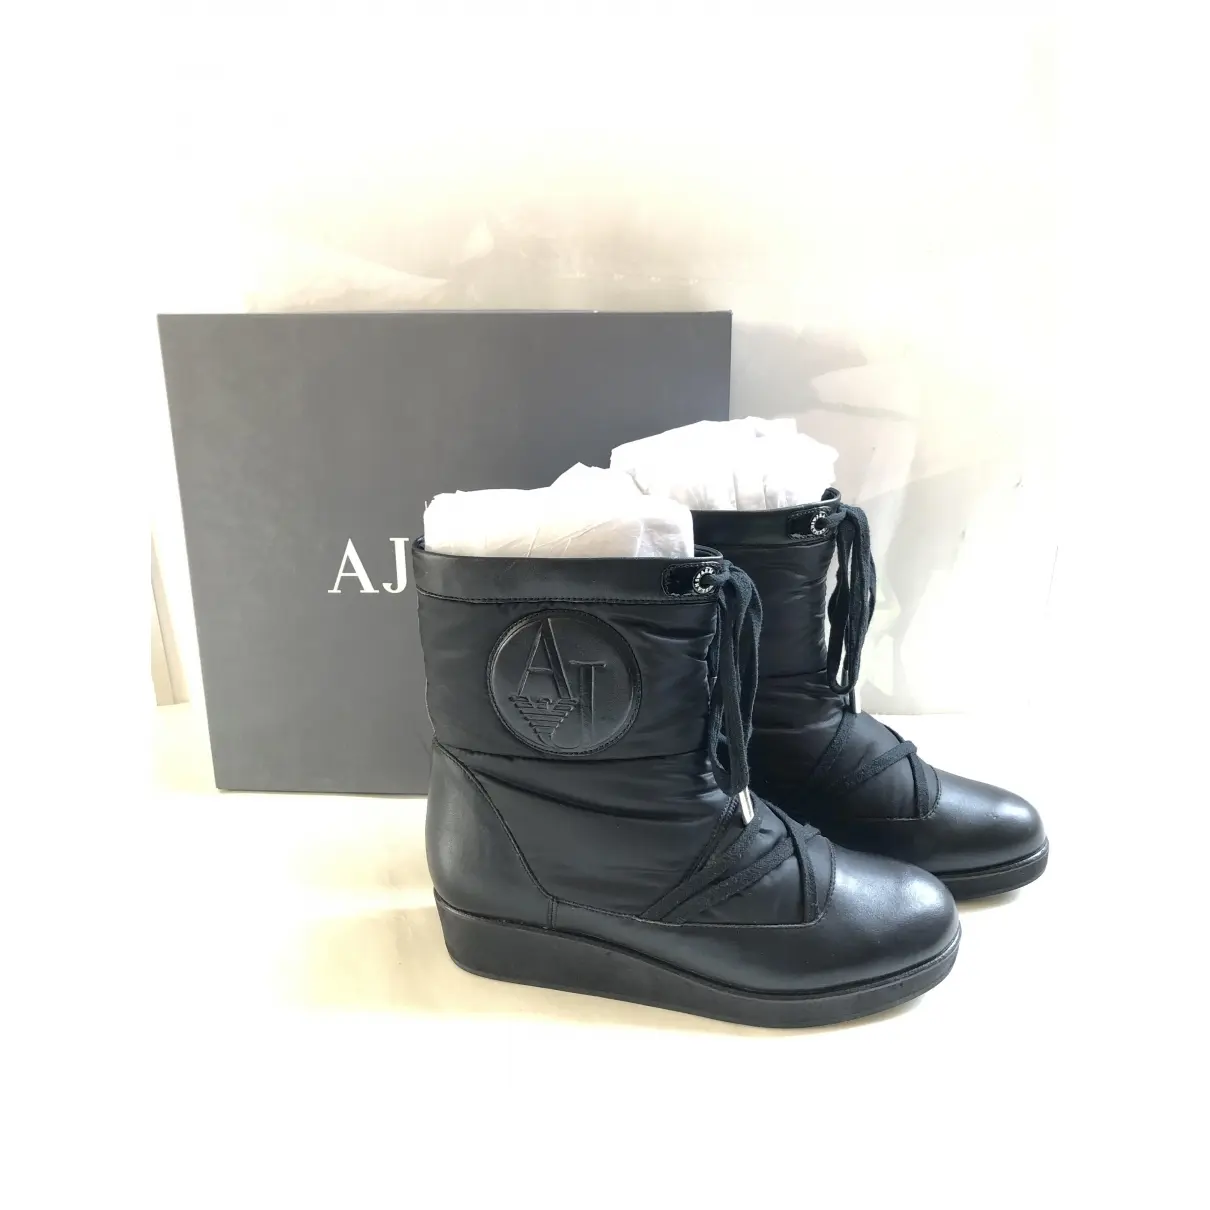 Armani Jeans Boots for sale